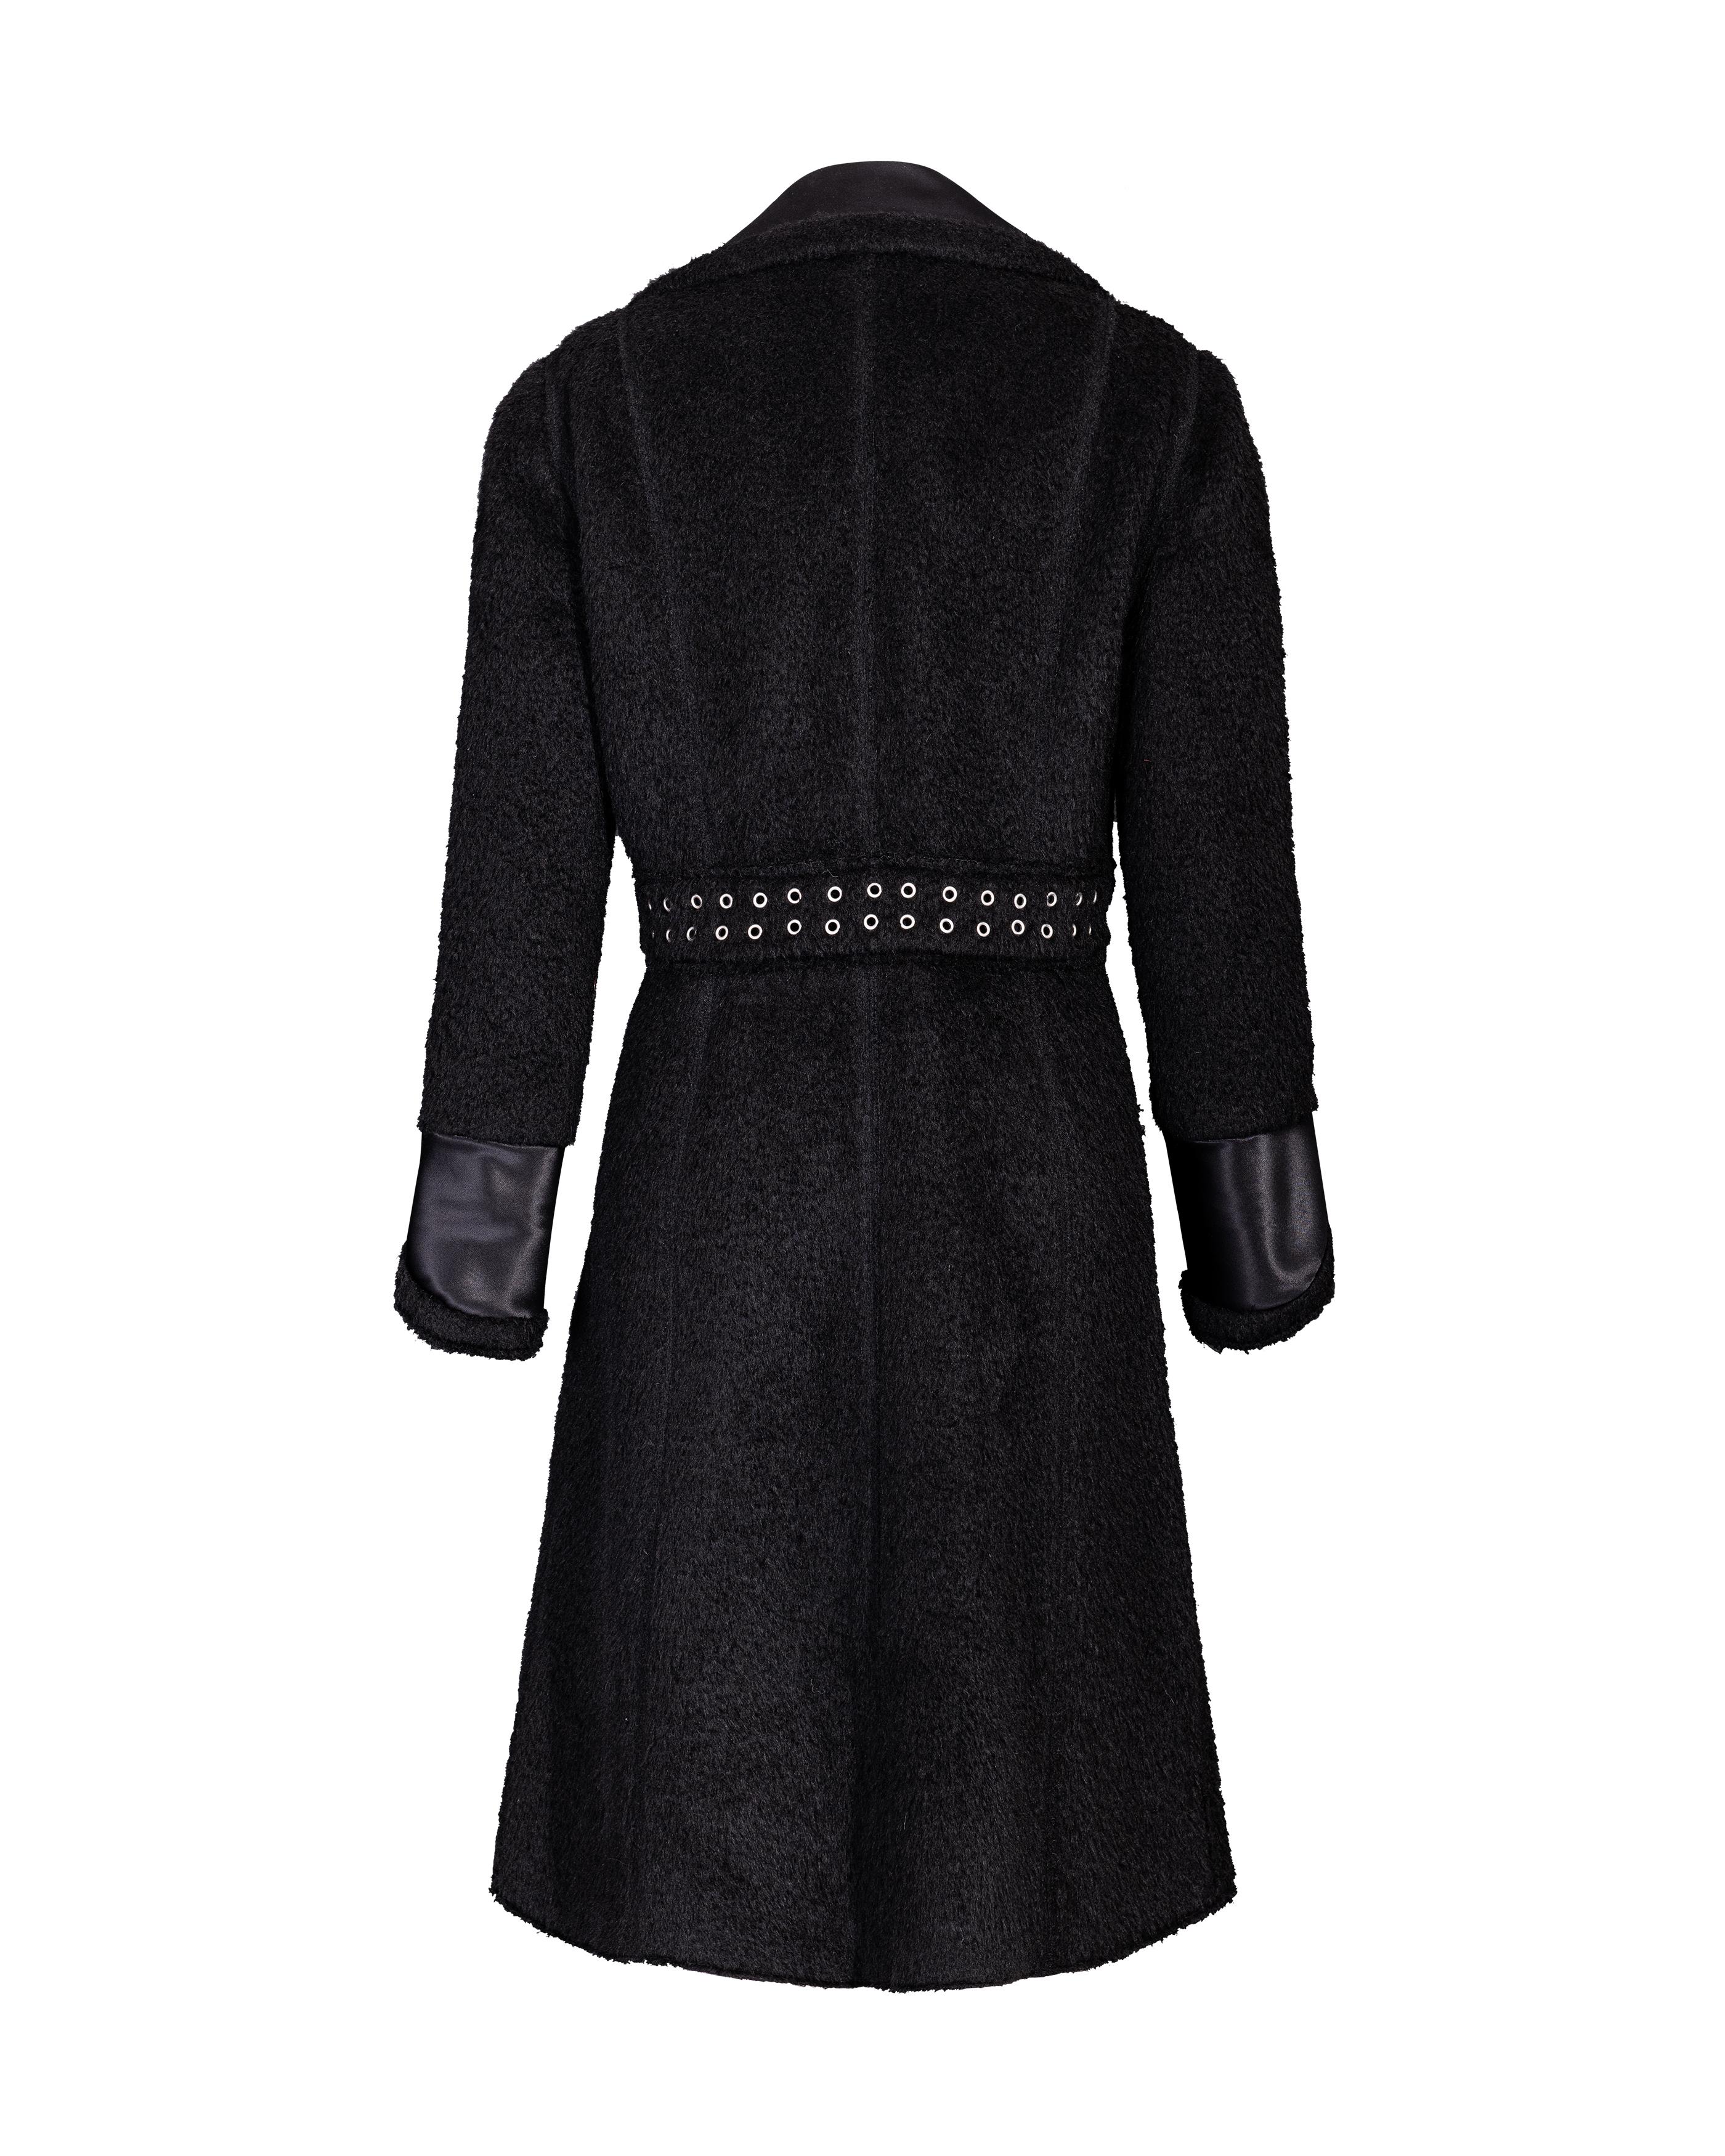 Women's Pre-Fall 2014 Céline by Phoebe Philo Black Shearling Coat with Gray Accents For Sale